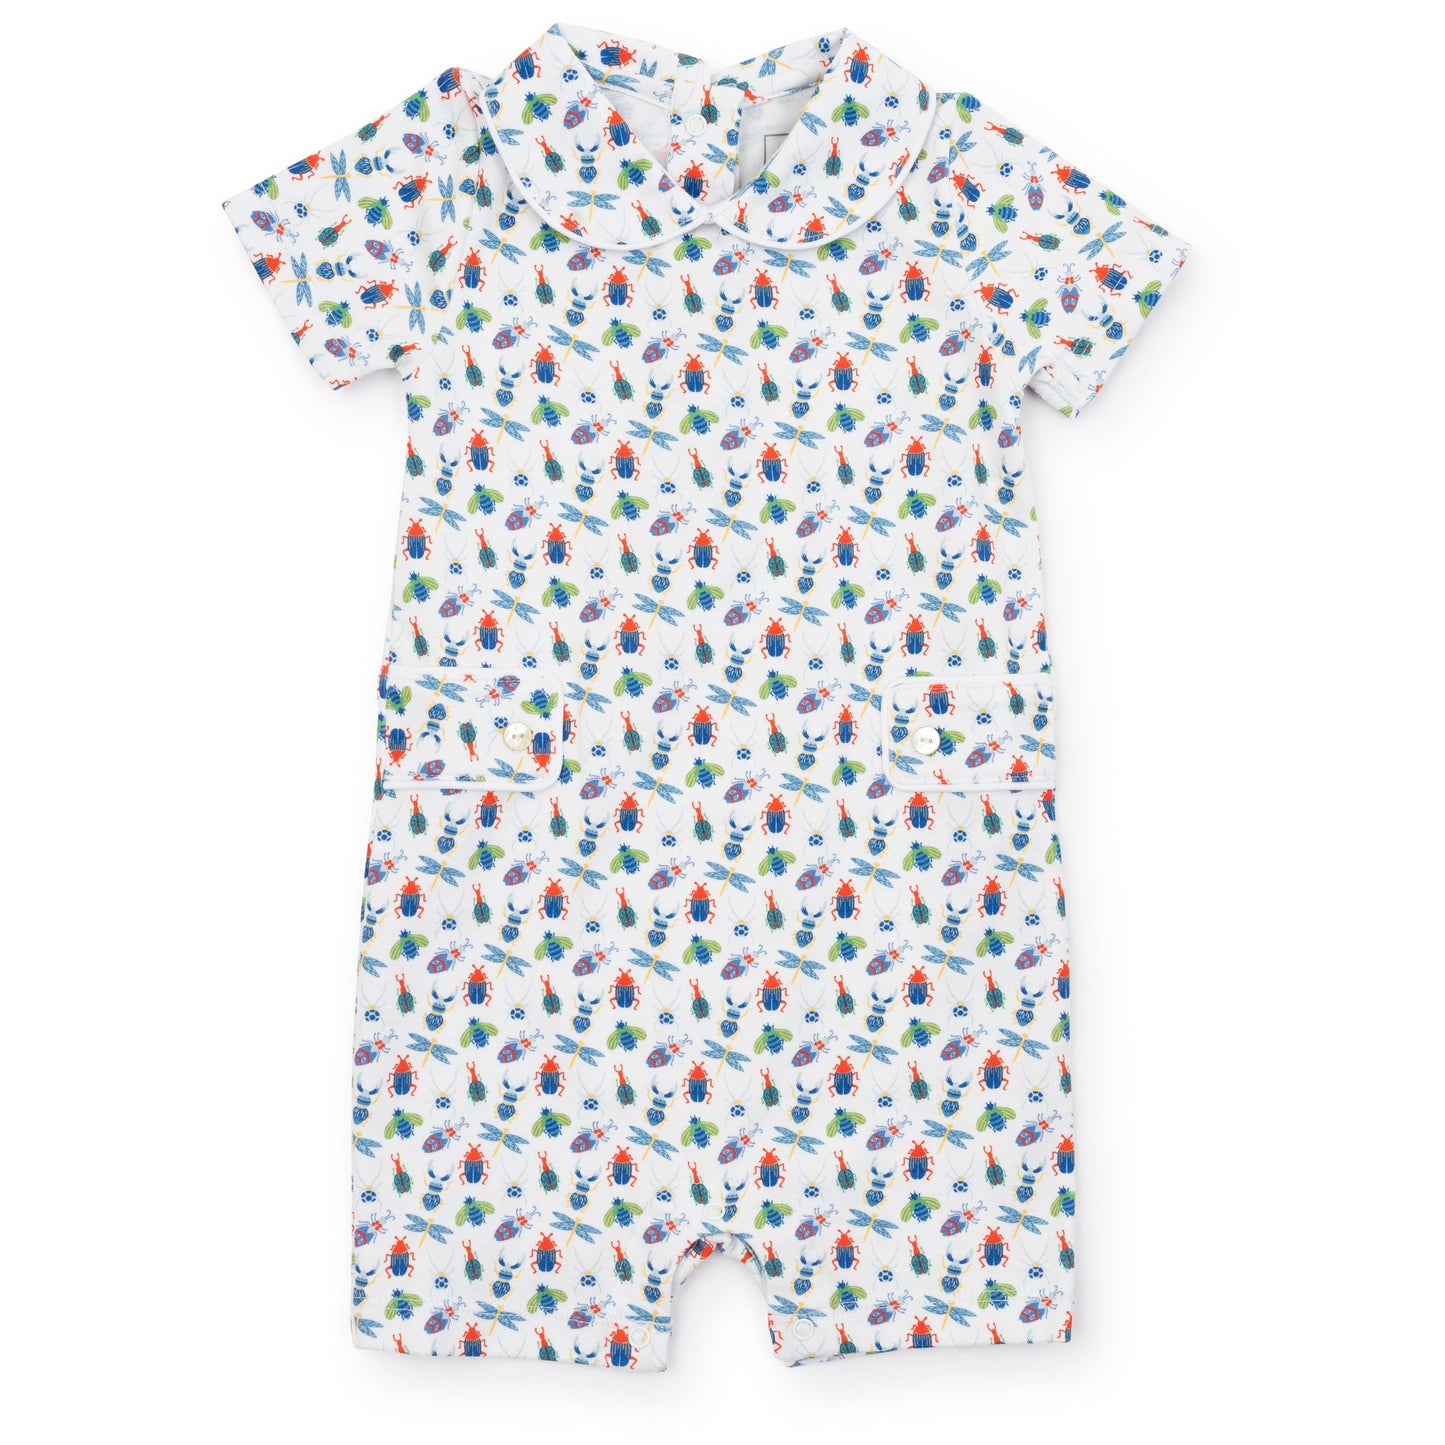 Lila and Hayes Henry Boys' Pima Cotton Shortall - Busy Bugs